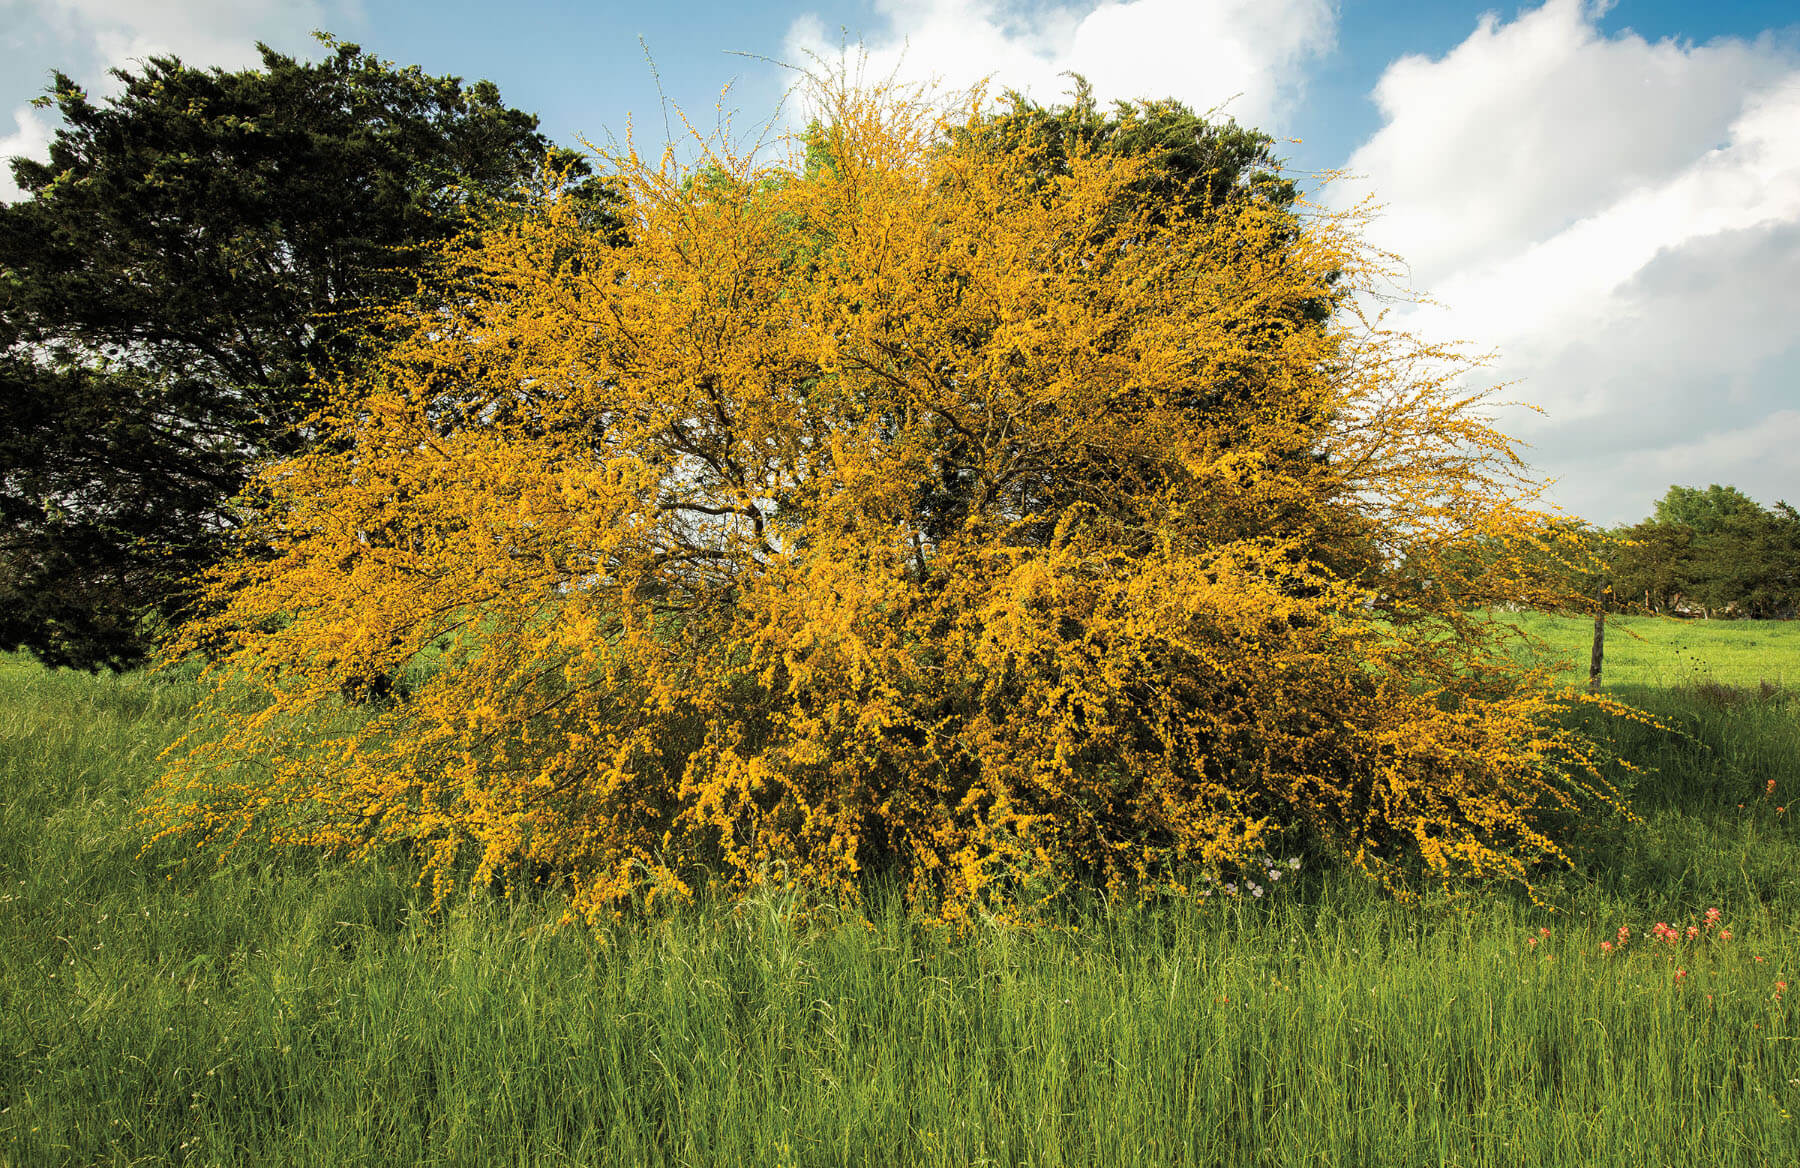 Golden branches of a huisache tree stand out in front of a green tree background in tall grass